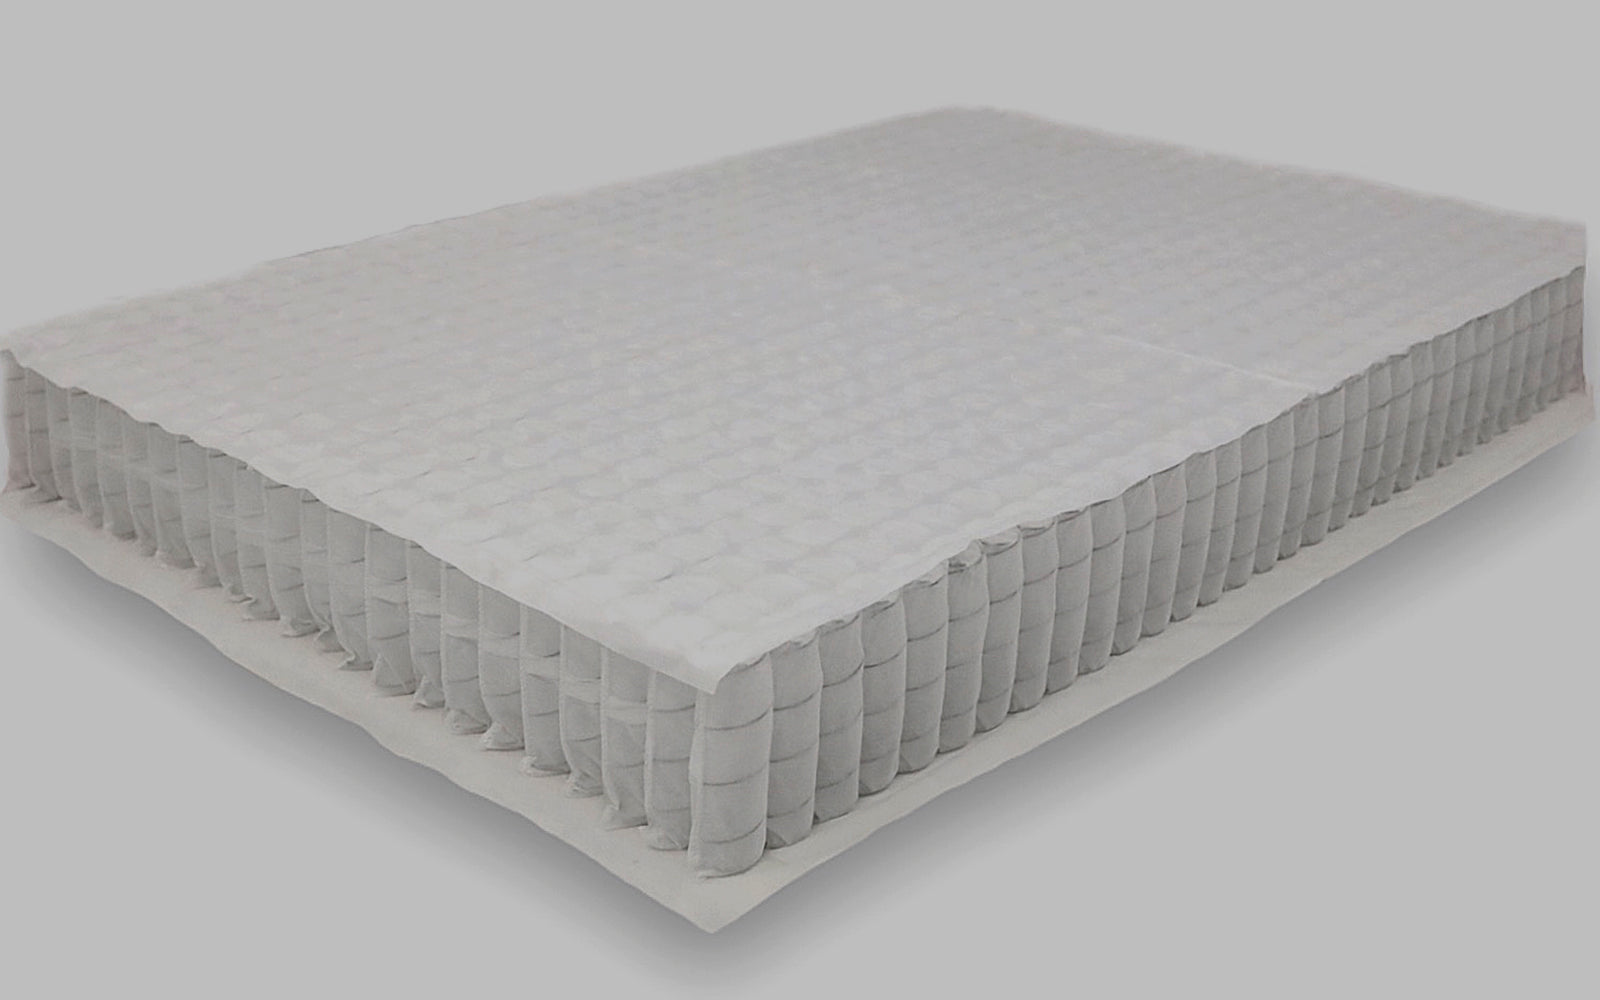 Harvest Green Mattress Pressure Relief Coil System Whole Unit